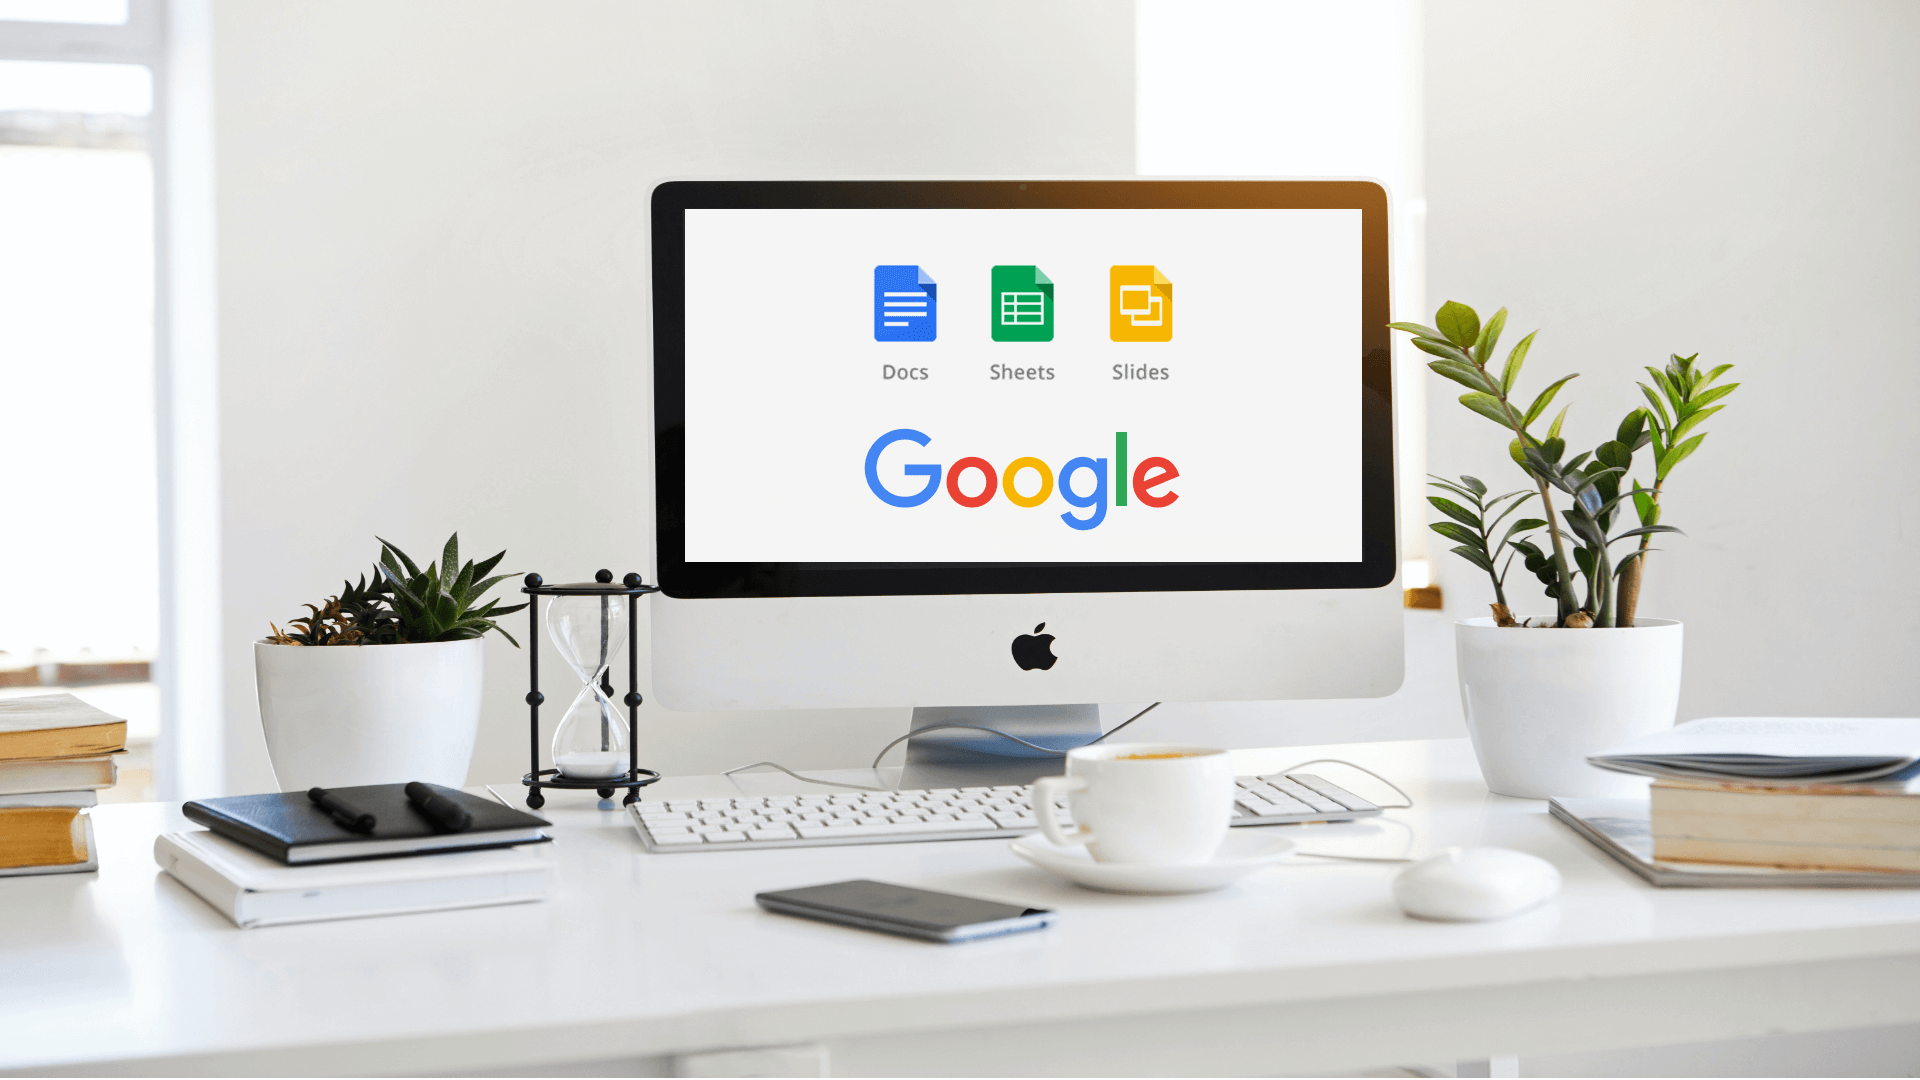 How ITESLIVE can help you display your Google Slides, Google Sheets and Google Docs files